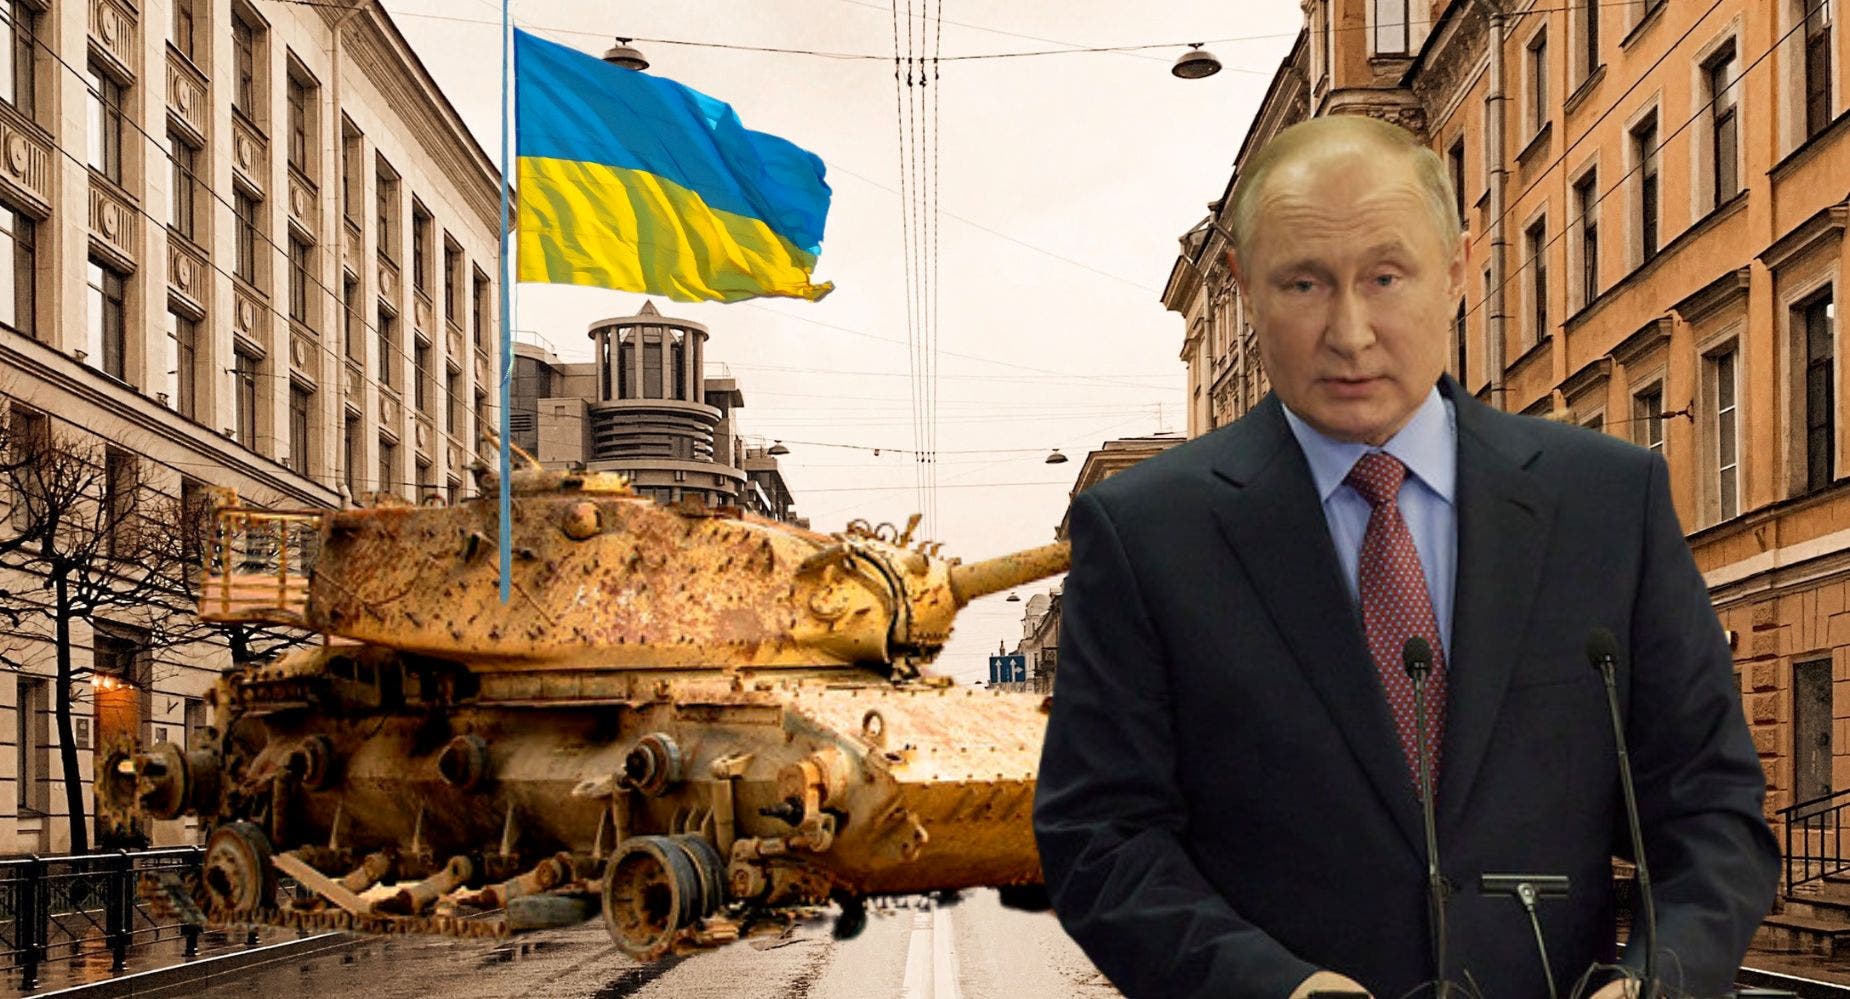 Ukraine Flaunts Burnt Russian Tanks In Putin's Face At Victory Parade: 'Buy Nicotine Patches, Occupants!'